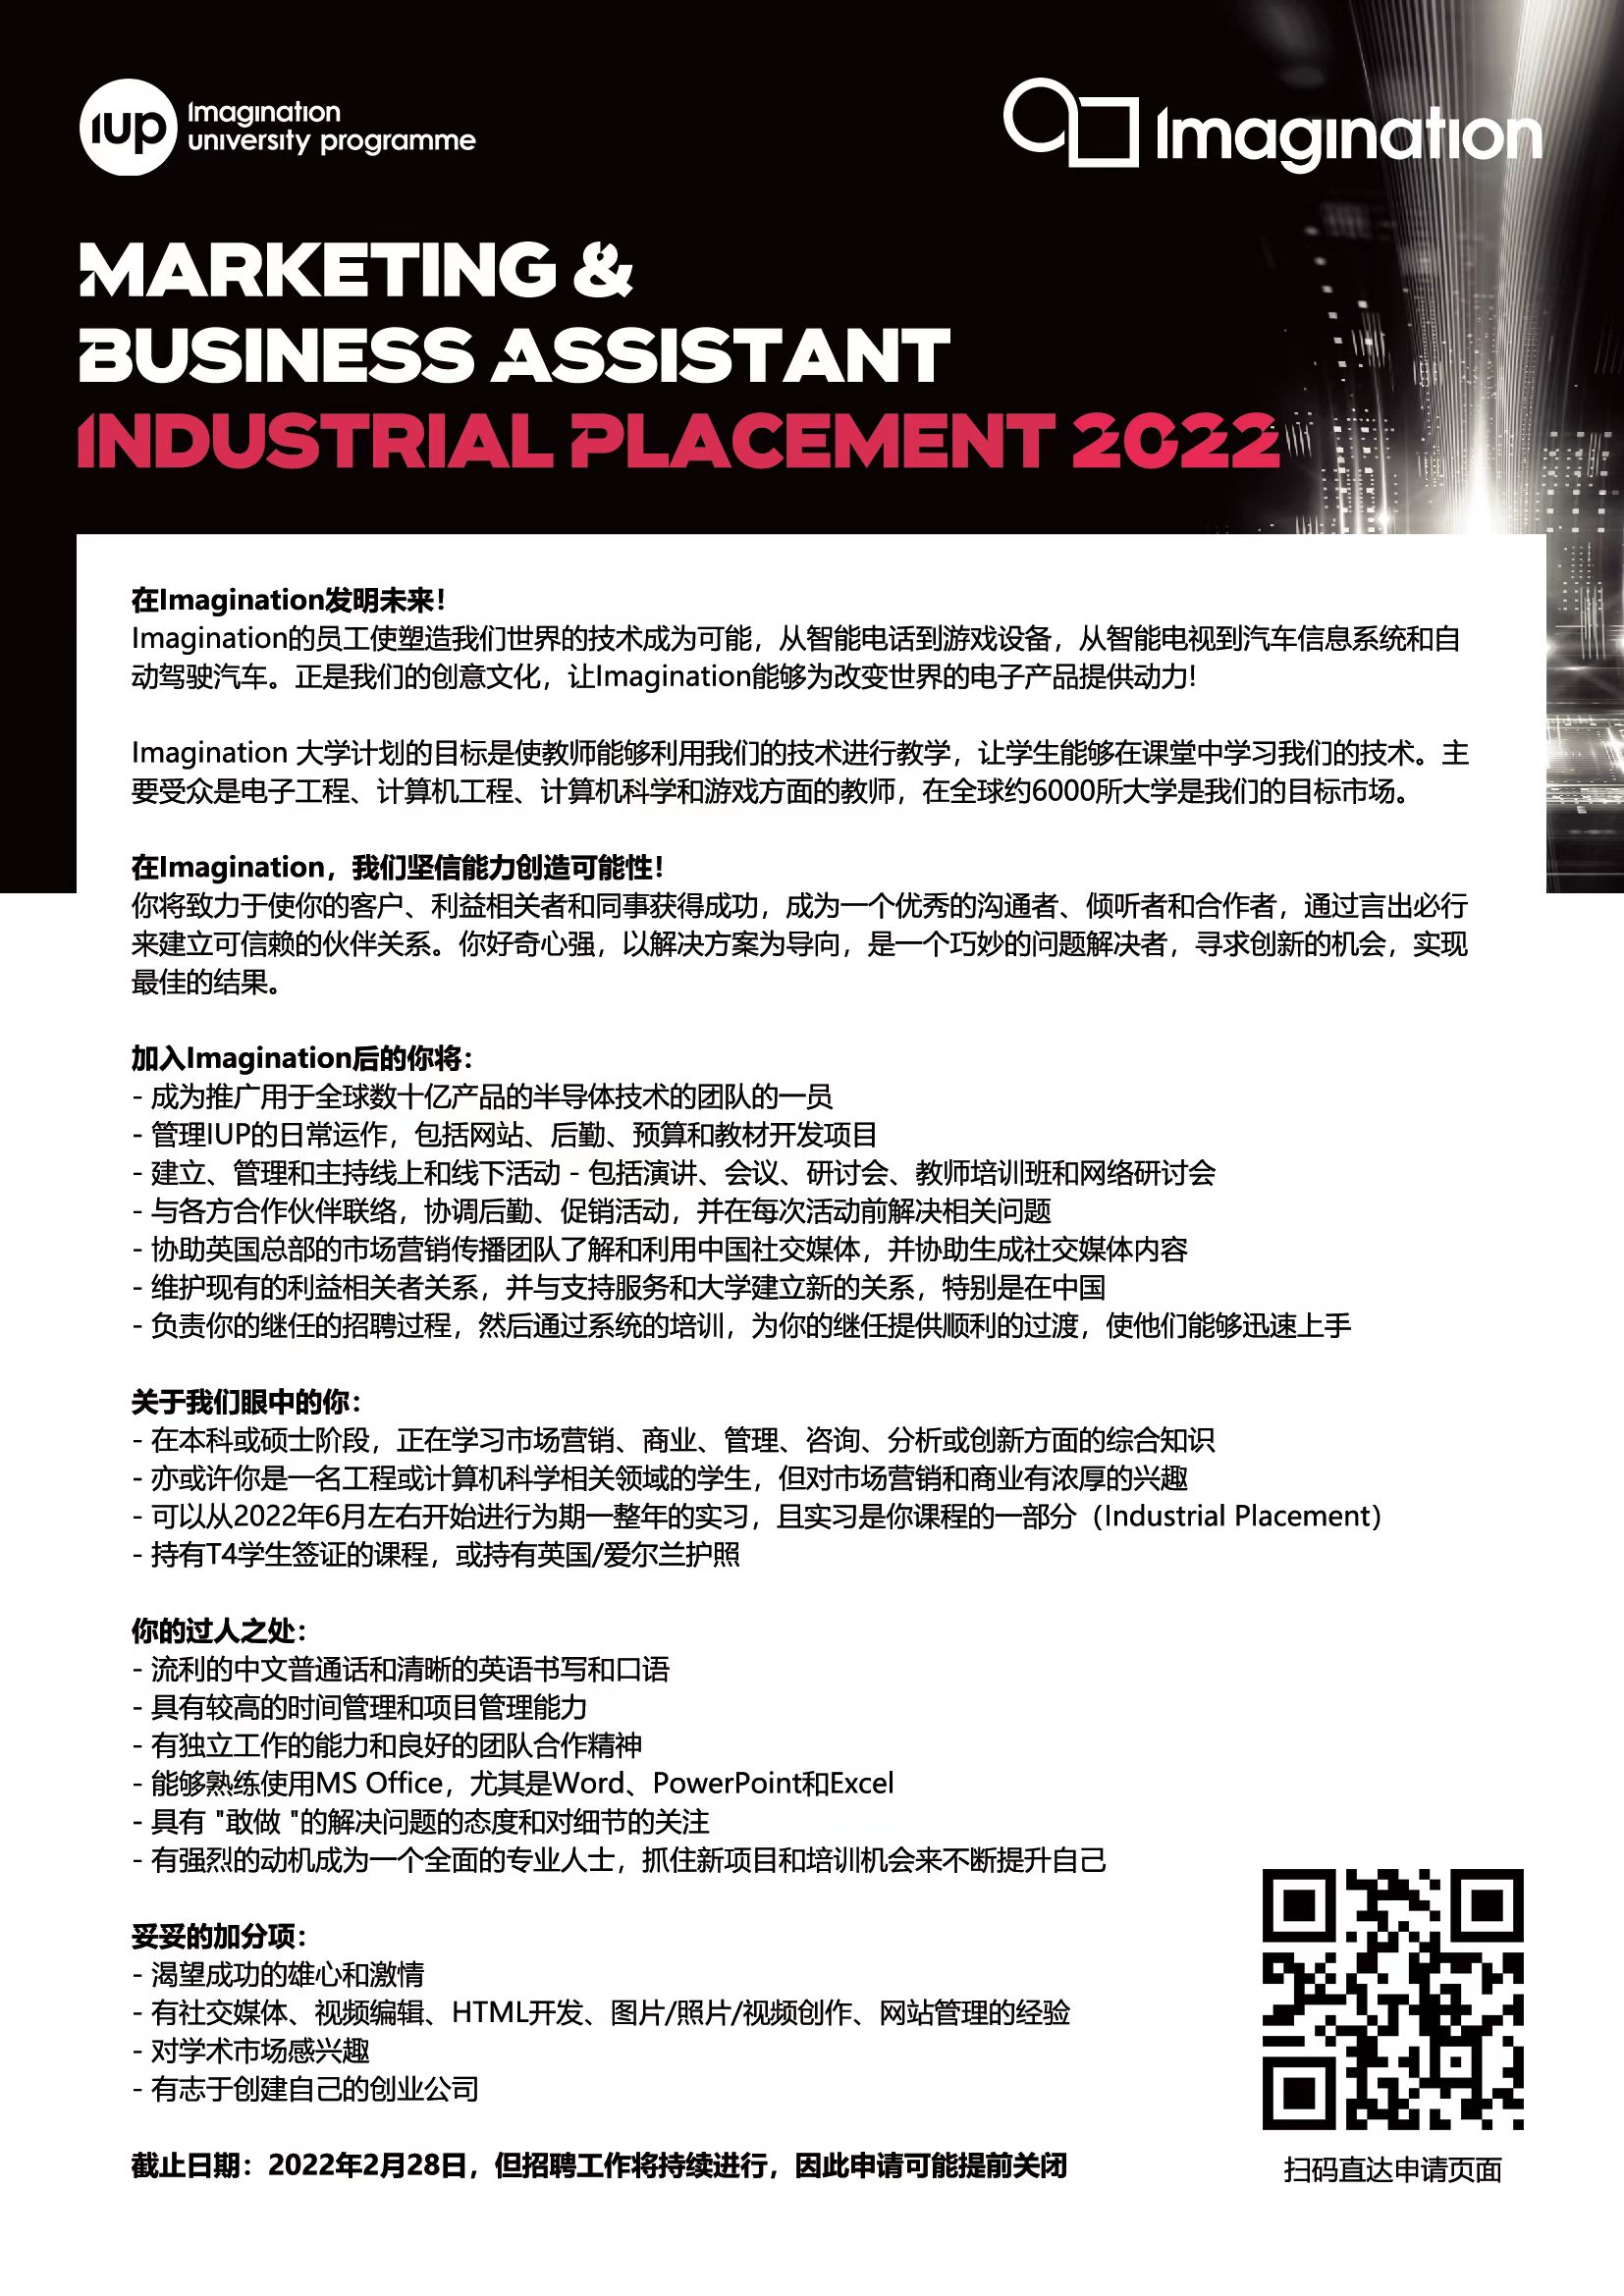 Marketing & Business Assistant Industrial Placement 2022